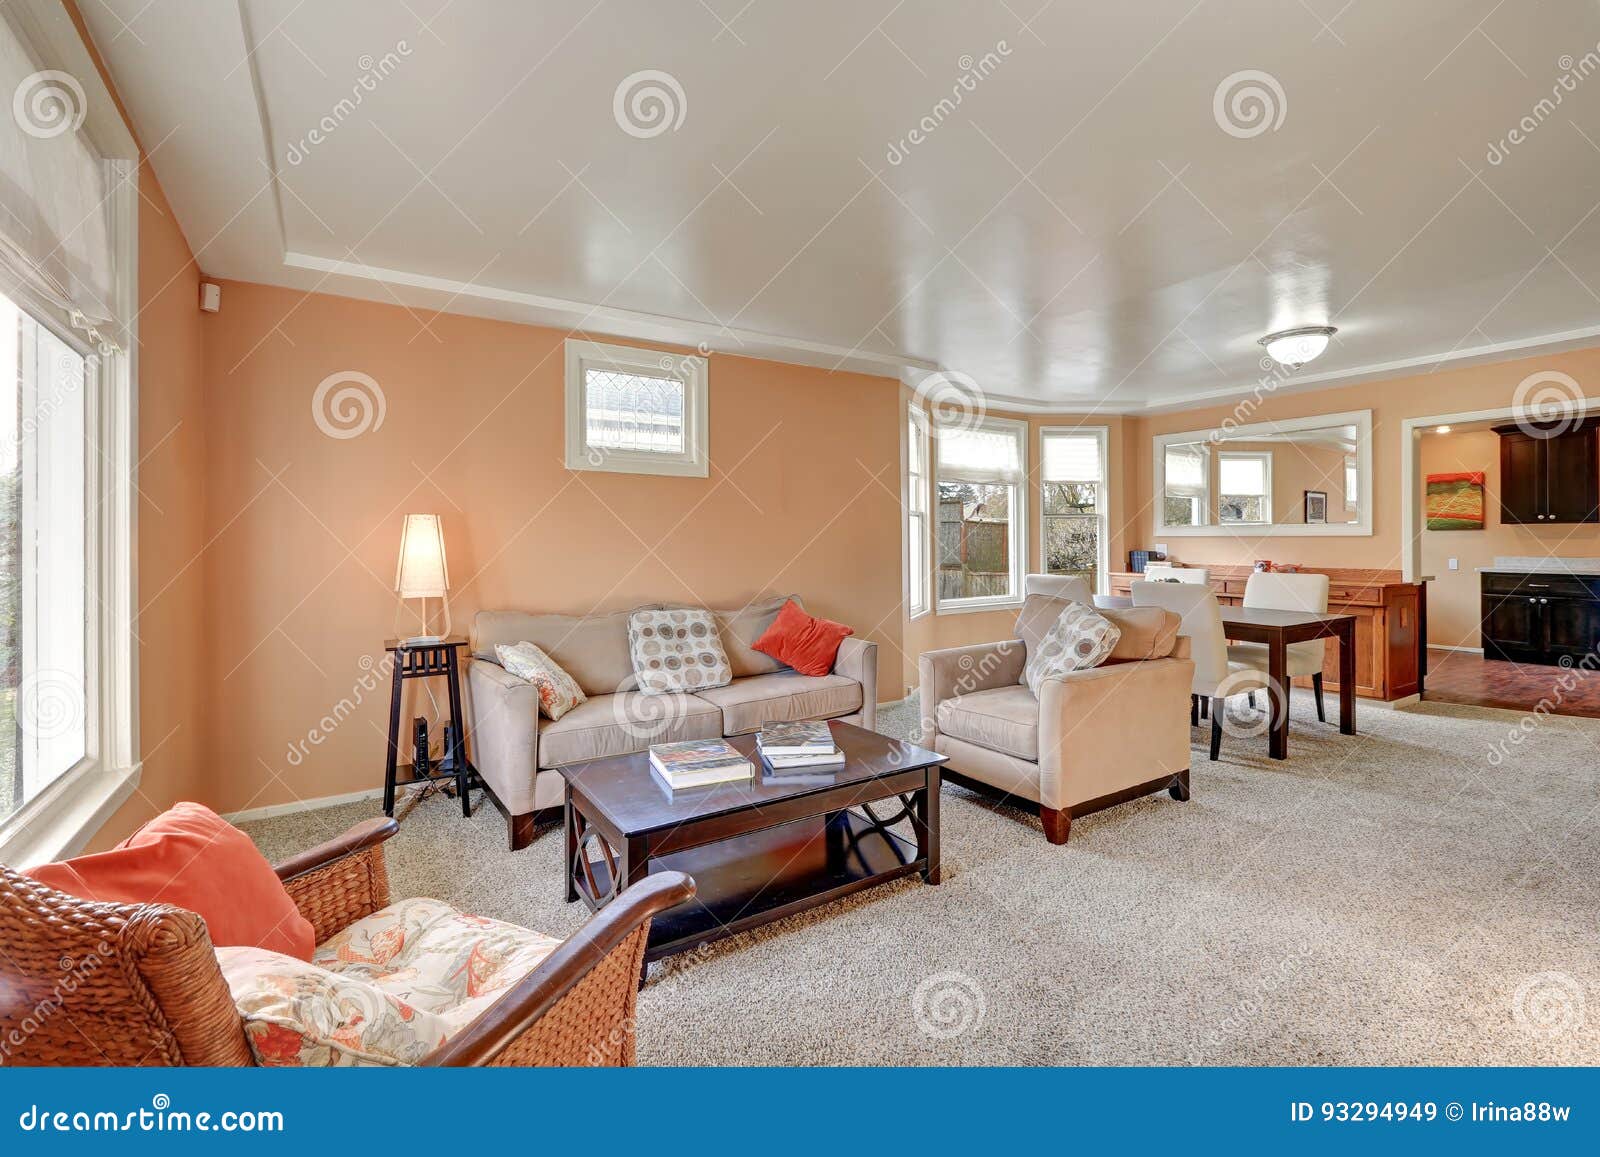 Cozy Living And Dining Room Interior With Peach Walls Stock